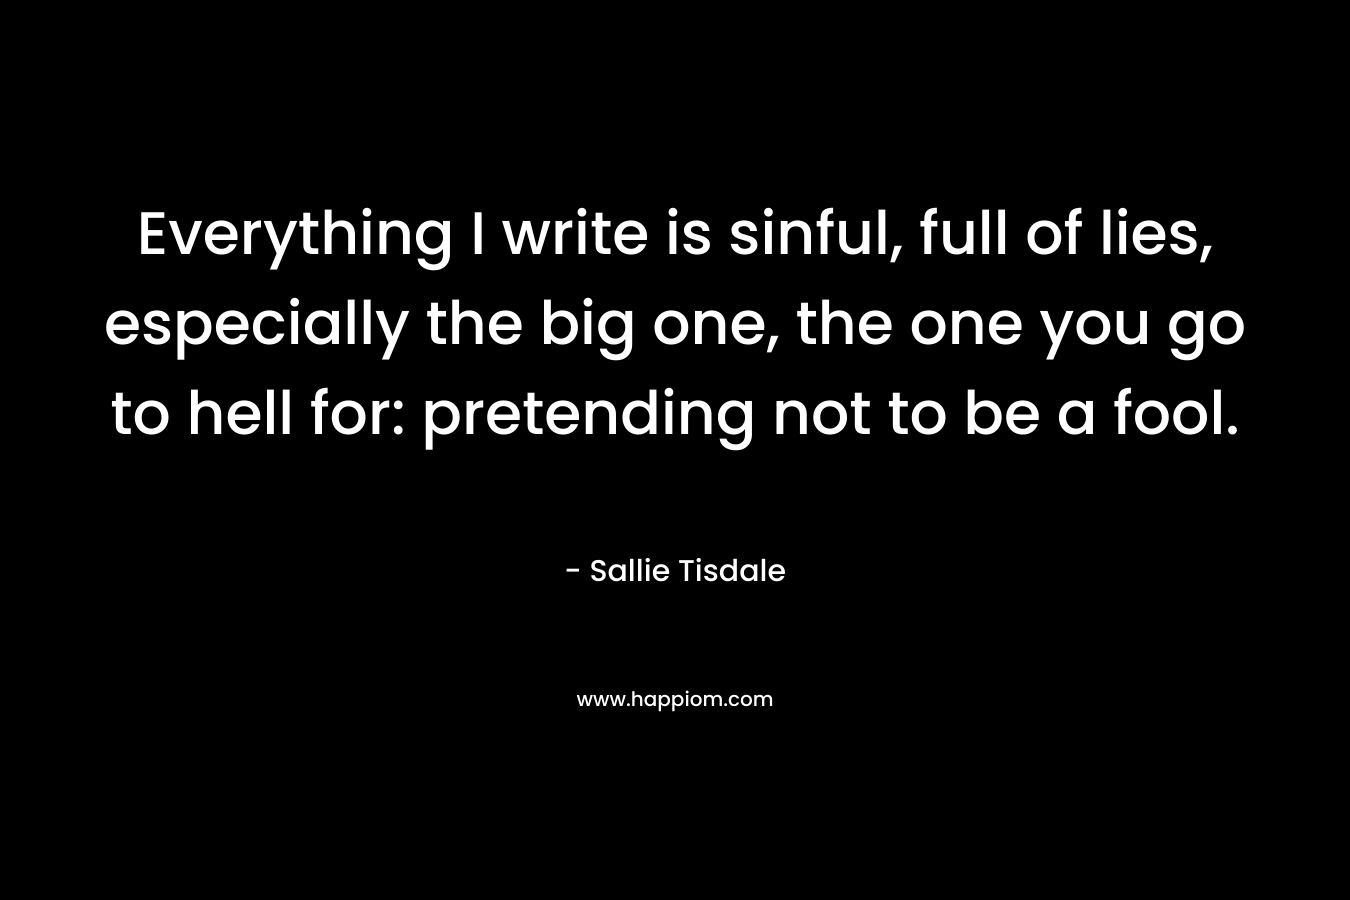 Everything I write is sinful, full of lies, especially the big one, the one you go to hell for: pretending not to be a fool.